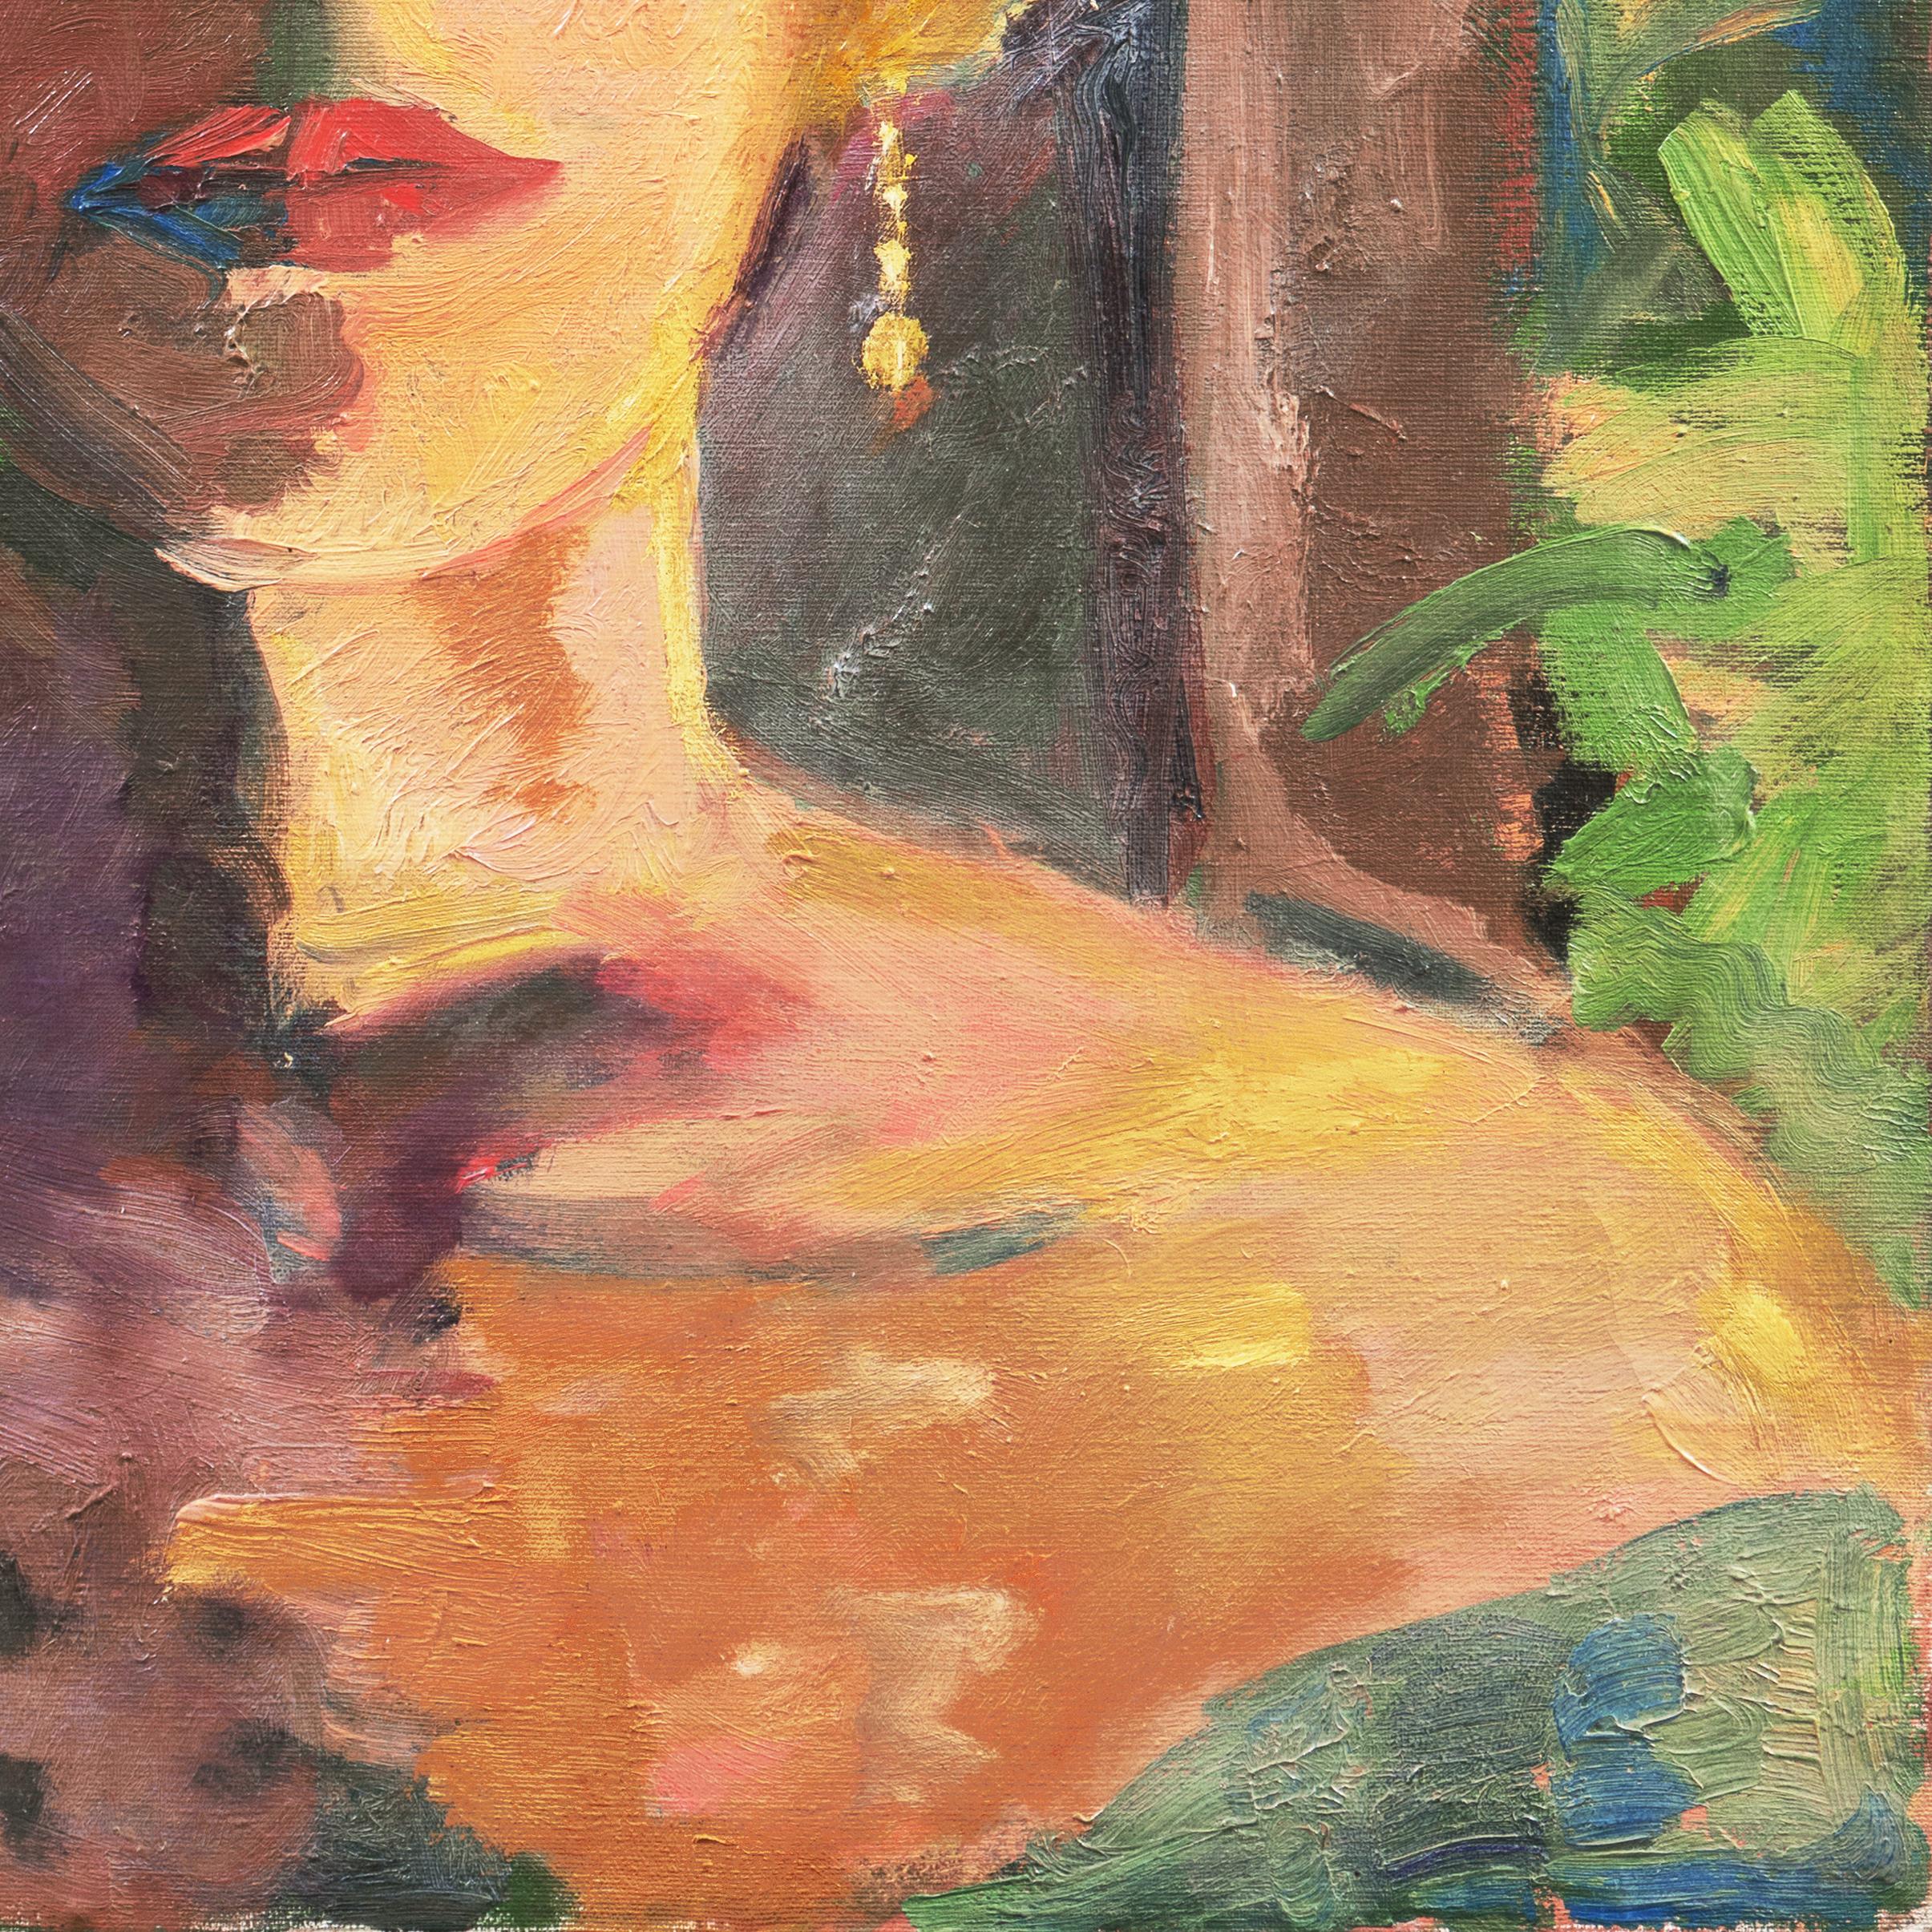 Signed verso, 'Douglass' and painted circa 1975.

A vibrant Expressionist study of a blonde woman in a formal dress shown head and shoulders and gazing directly towards the viewer against a background of trees.